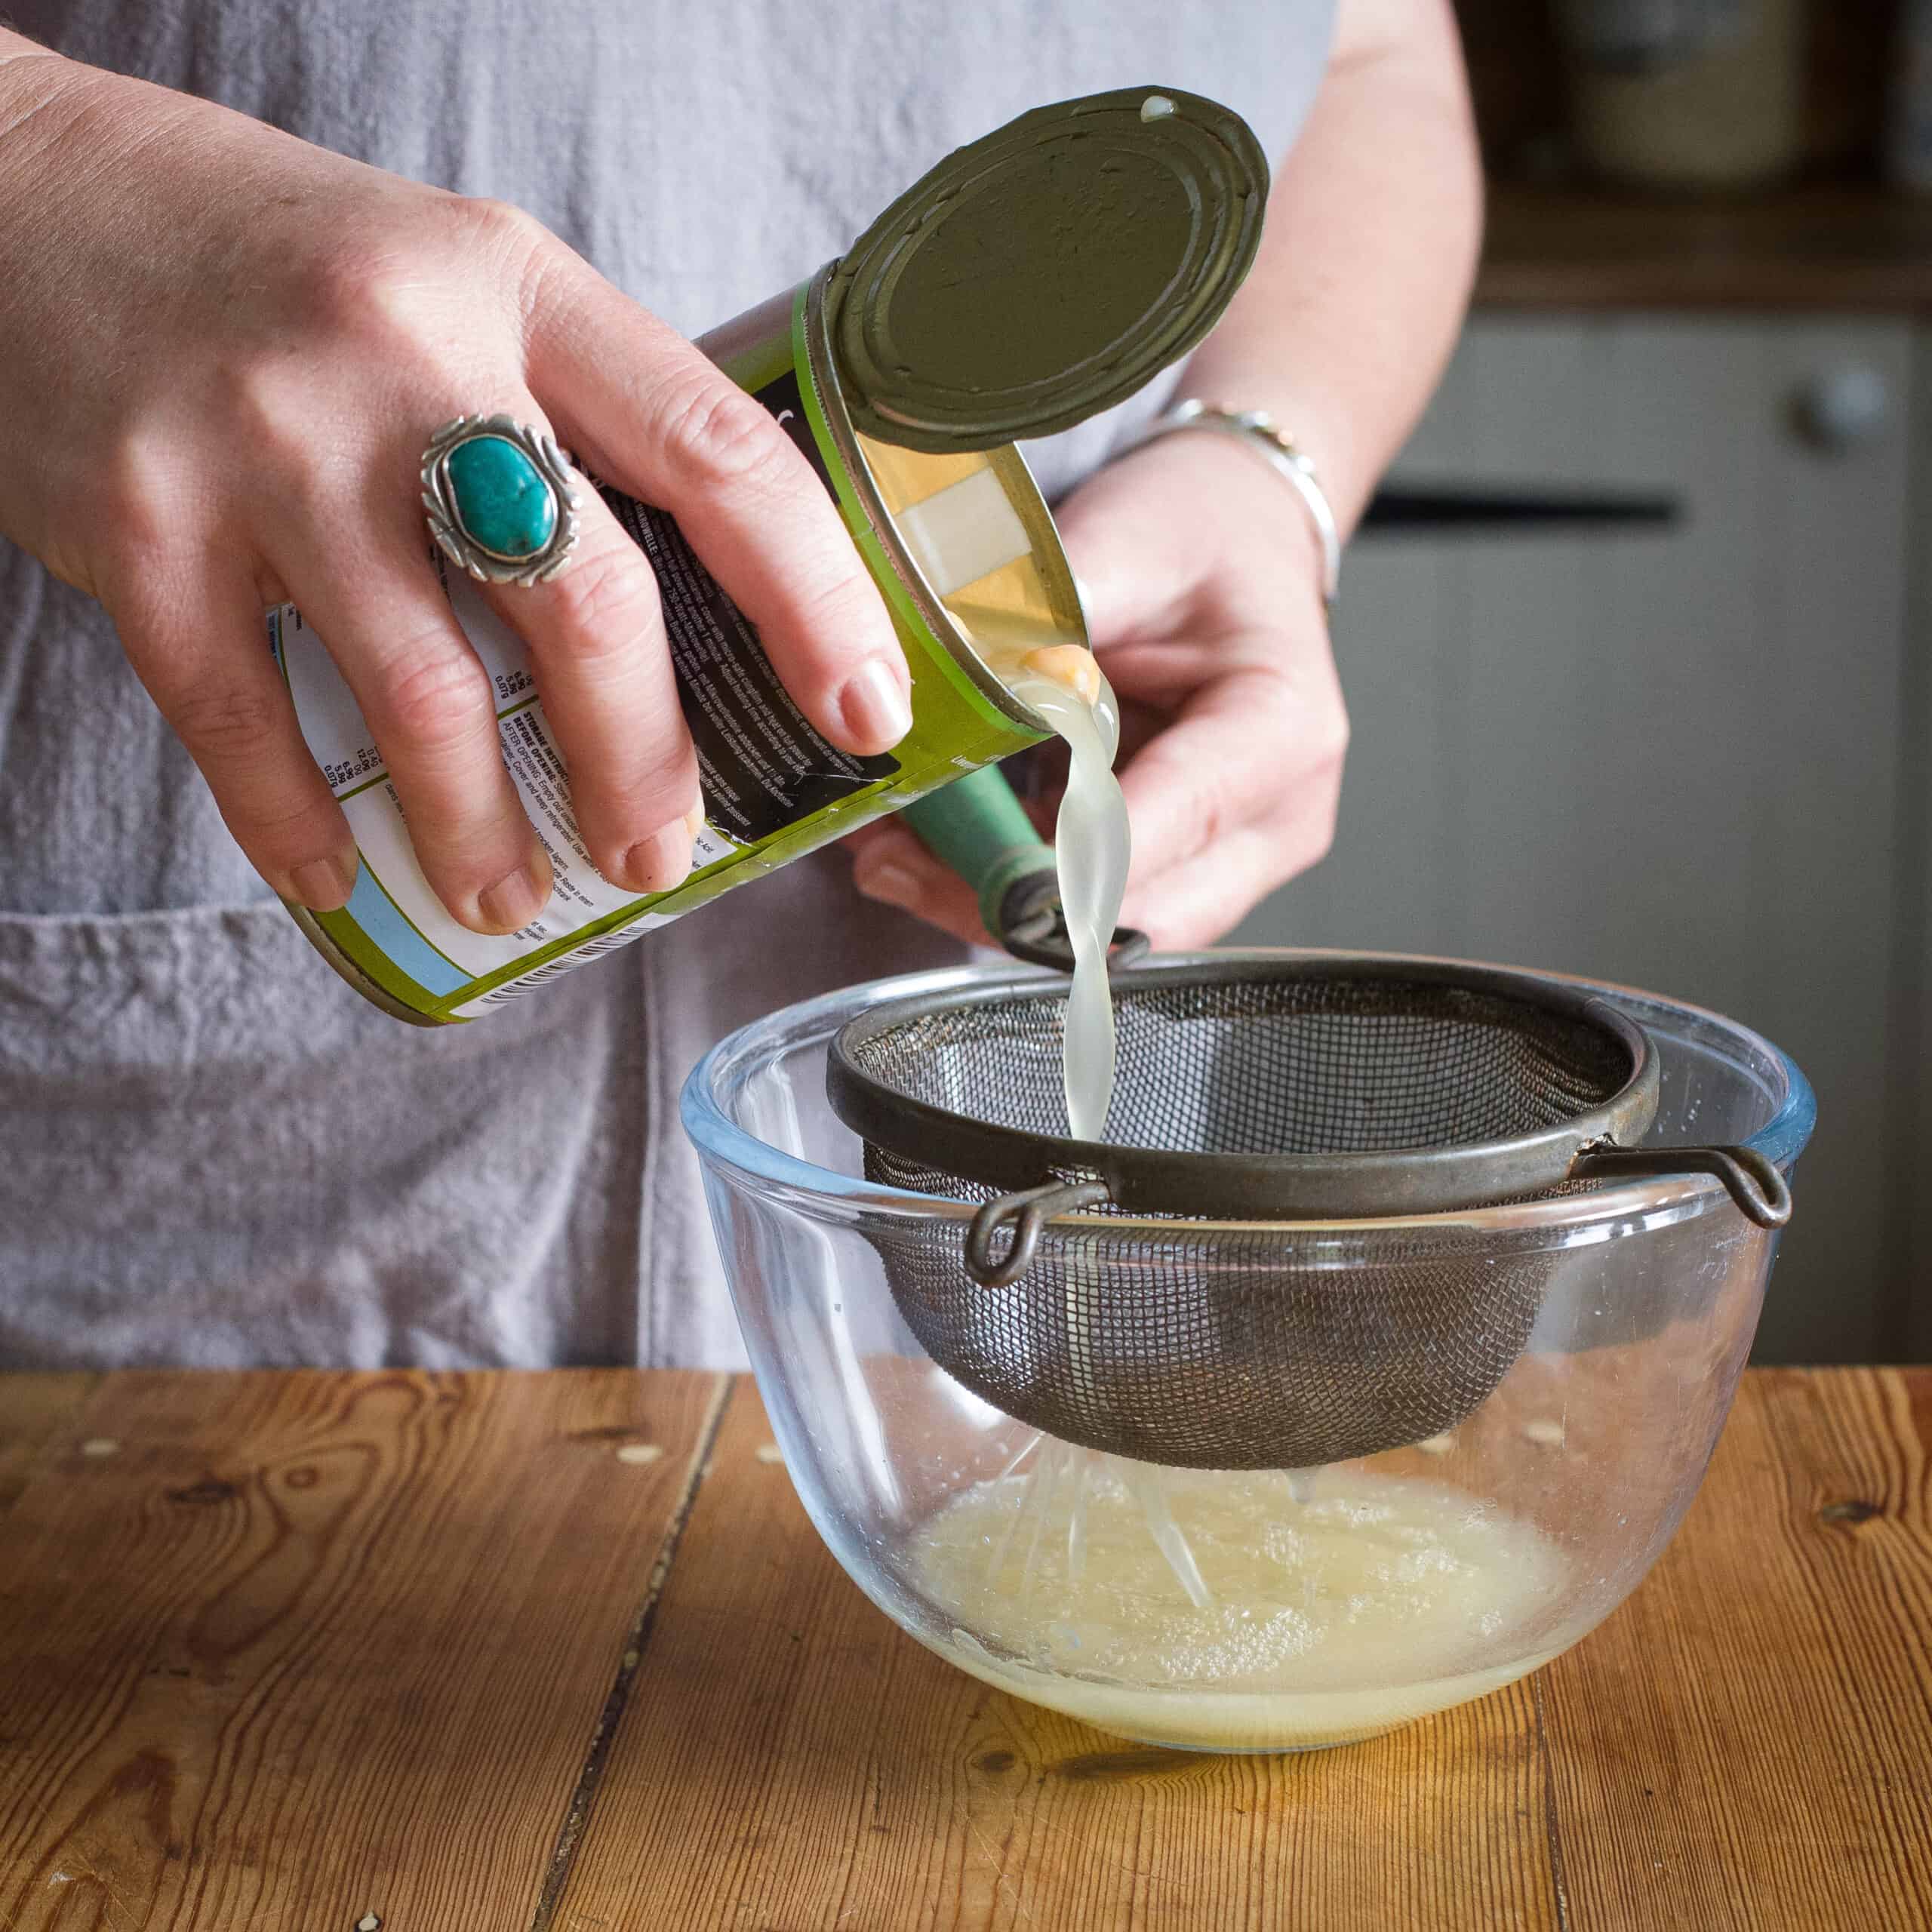 Woman’s hands pouring a can of chickpeas into a sieve over a glass bowl to drain off the liquid